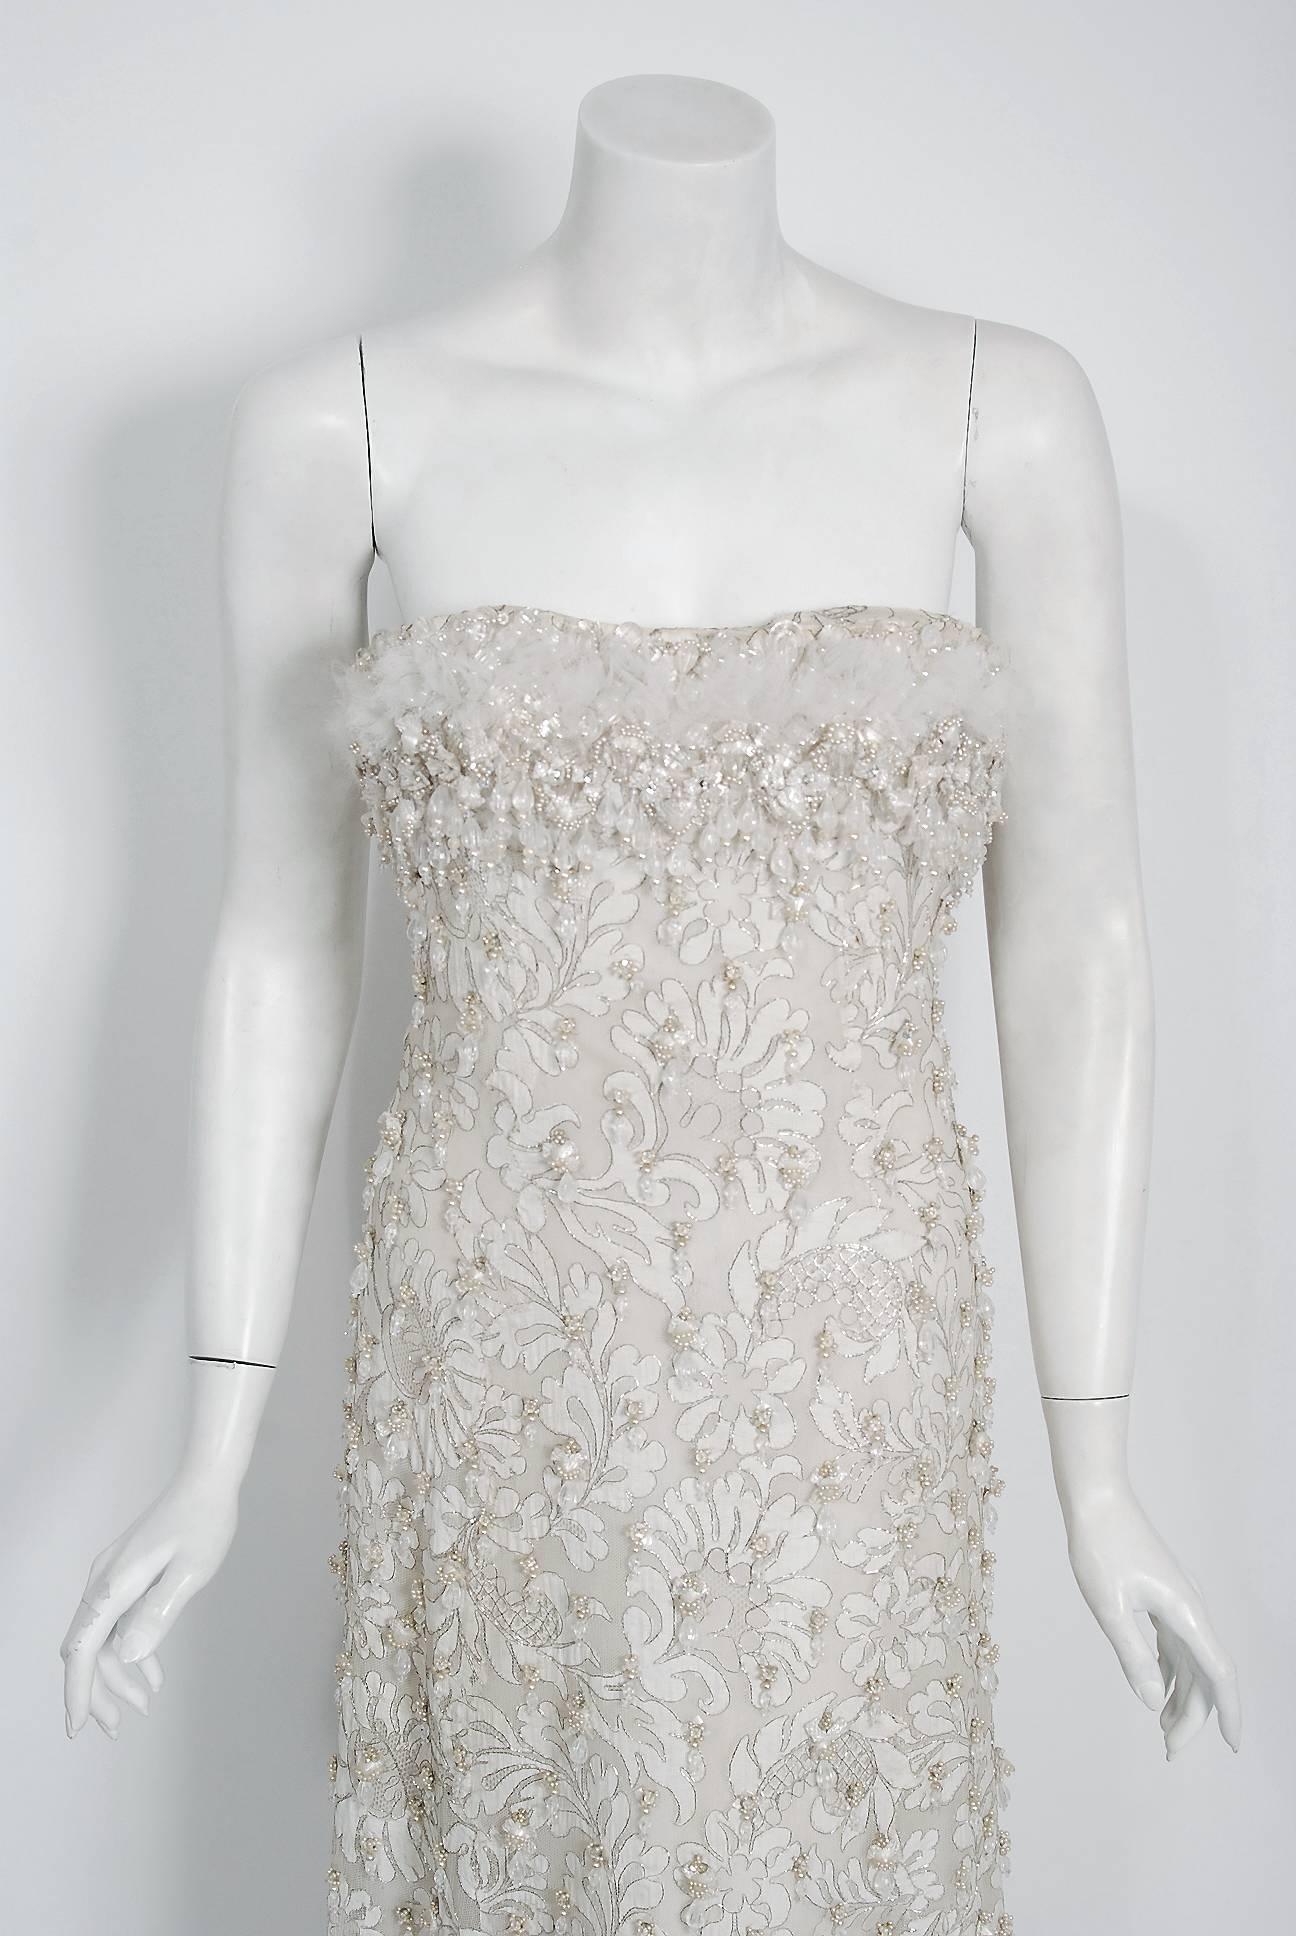 Breathtaking Pierre Balmain Haute Couture ivory metallic embroidered lace gown dating back to his 1965 runway collection. This iconic designer created a very sculptural quality which was always allied with a ladylike essence. His garments have a